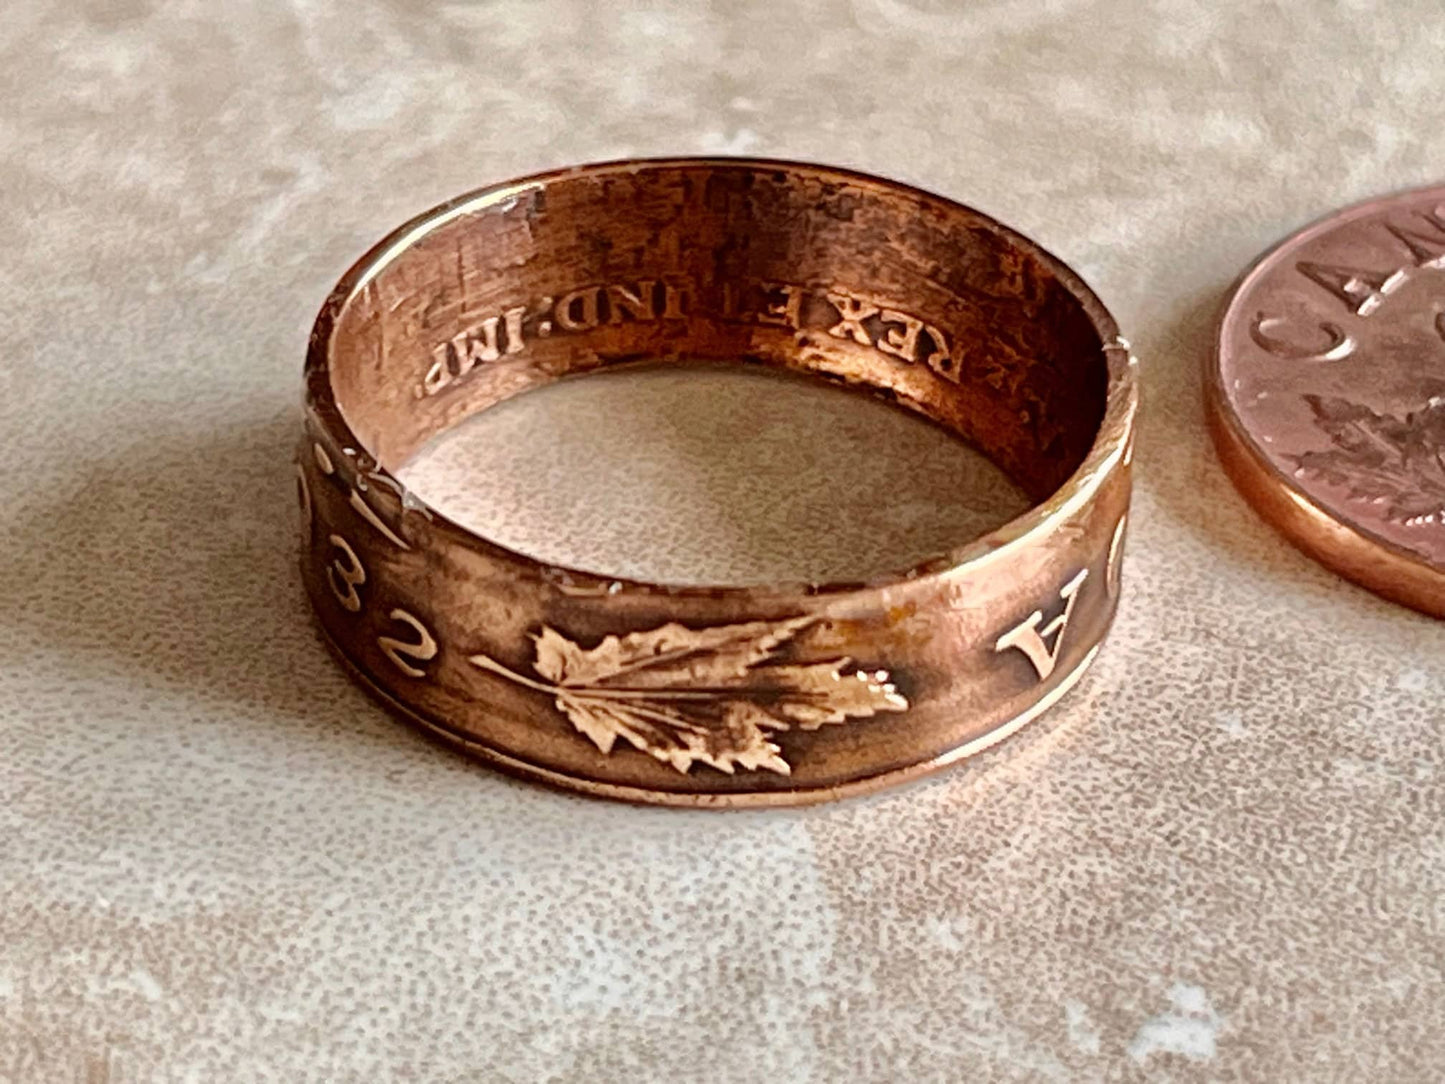 Canada Coin Ring Penny Canadian Maple Leaf One Cent Ring Handmade Jewelry Gift For Friend Coin Ring Gift For Him Her World Coins Collector